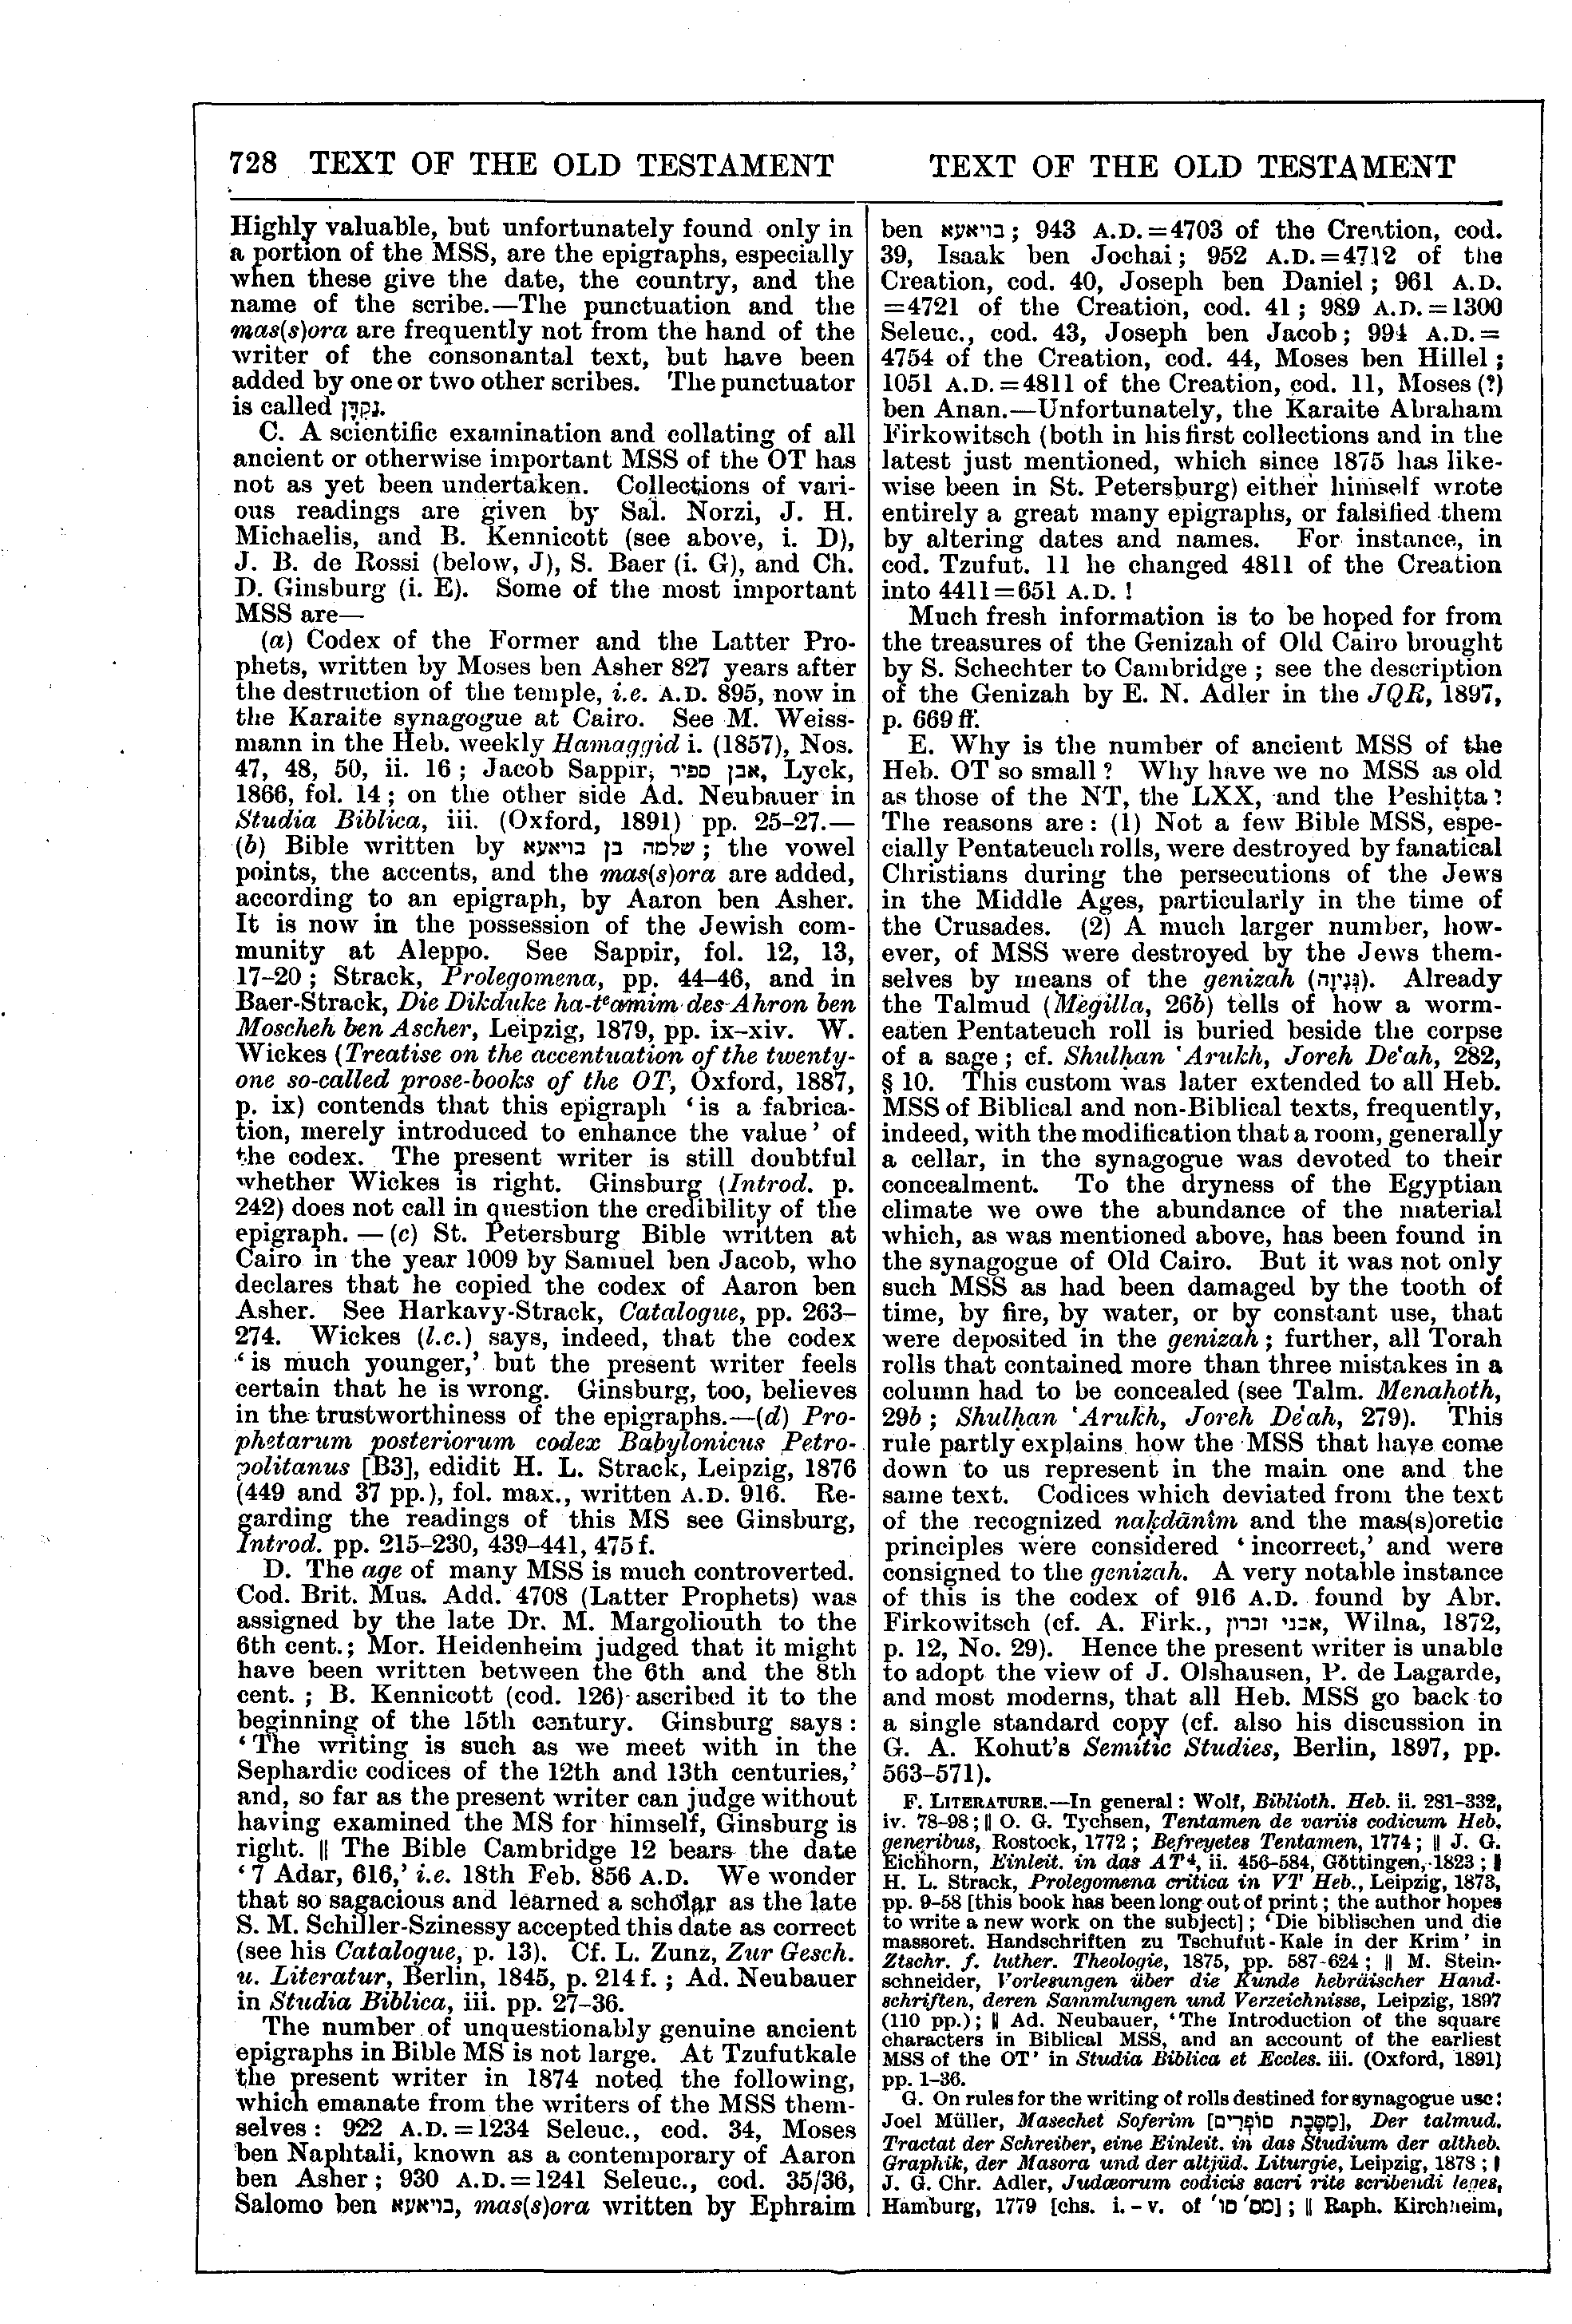 Image of page 728